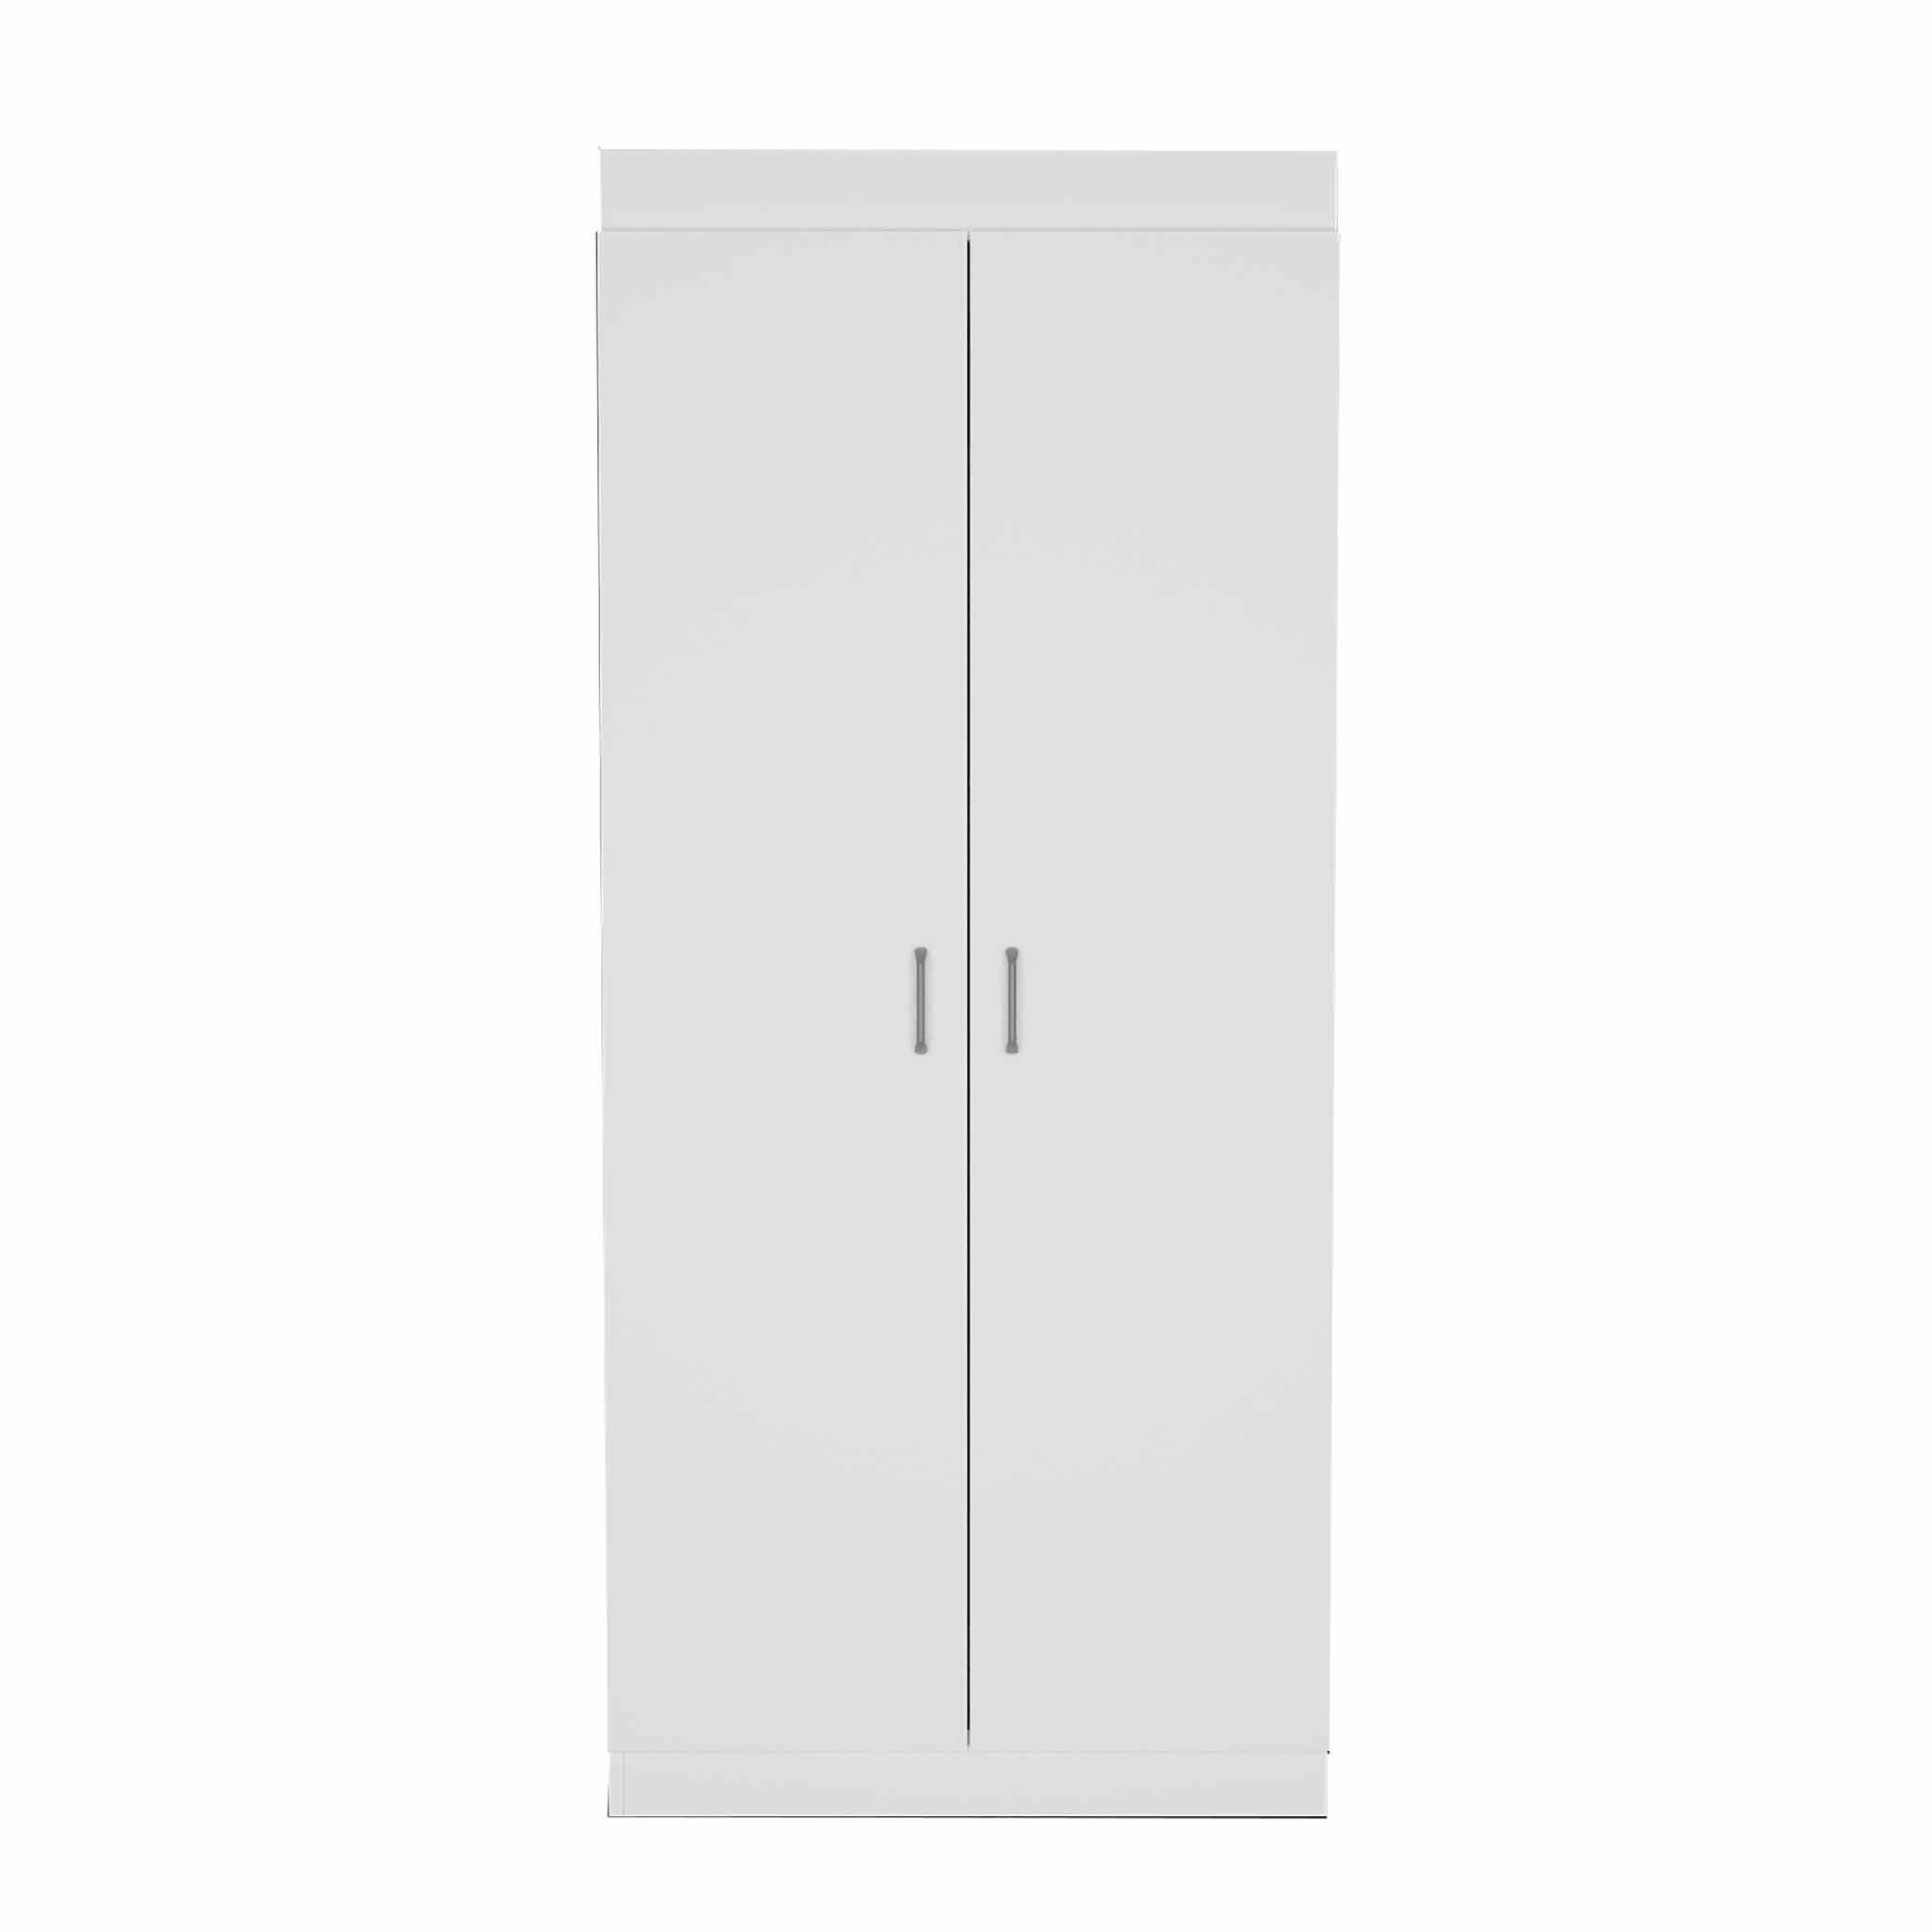 63” Classic White Pantry Cabinet with Two Full Size Doors